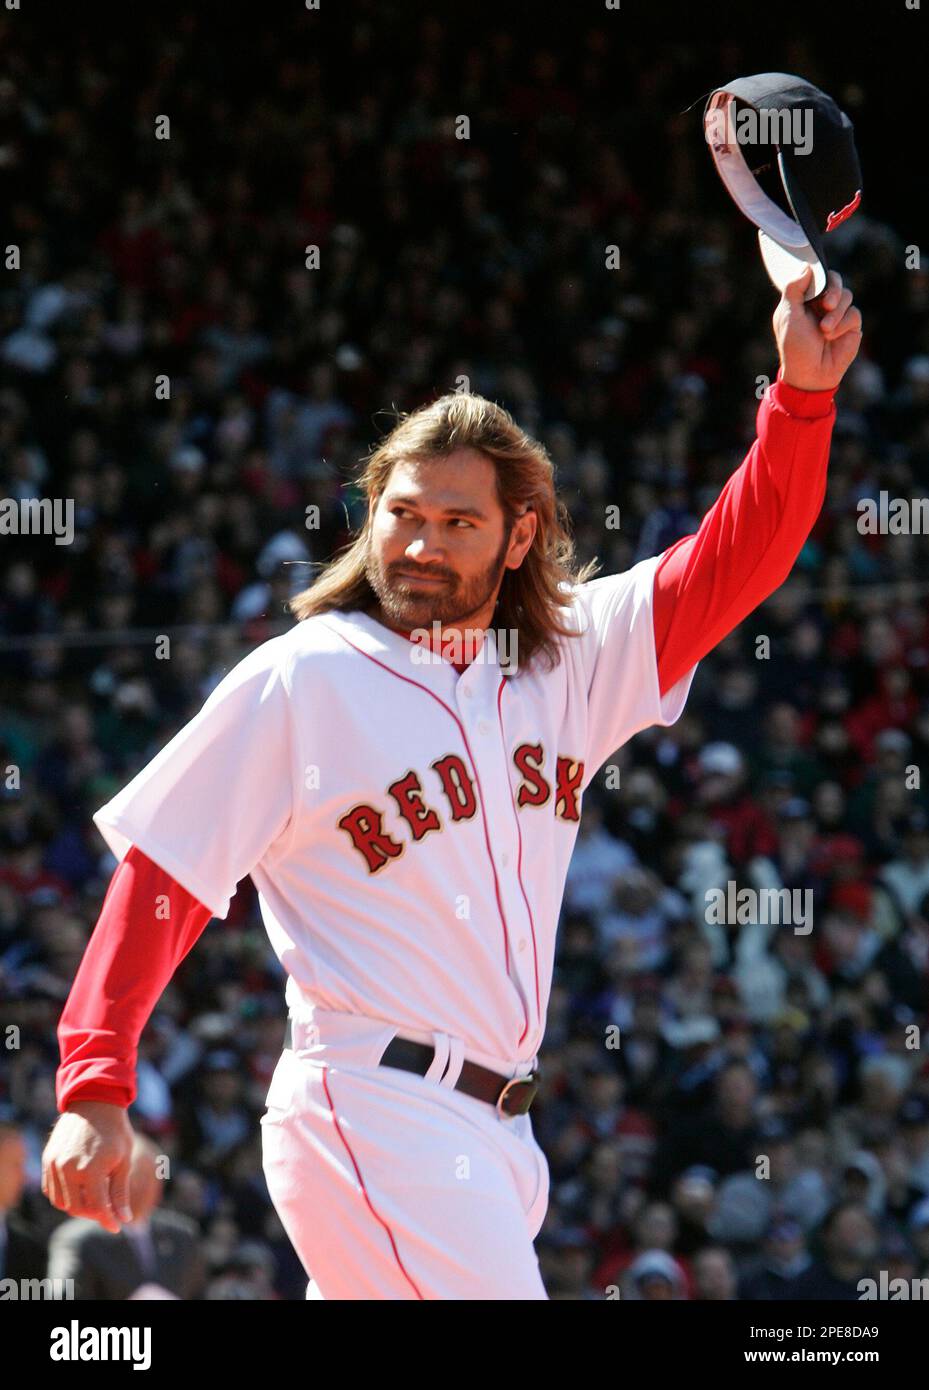 Boston Red Sox's Johnny Damon waves to the crowd prior to the